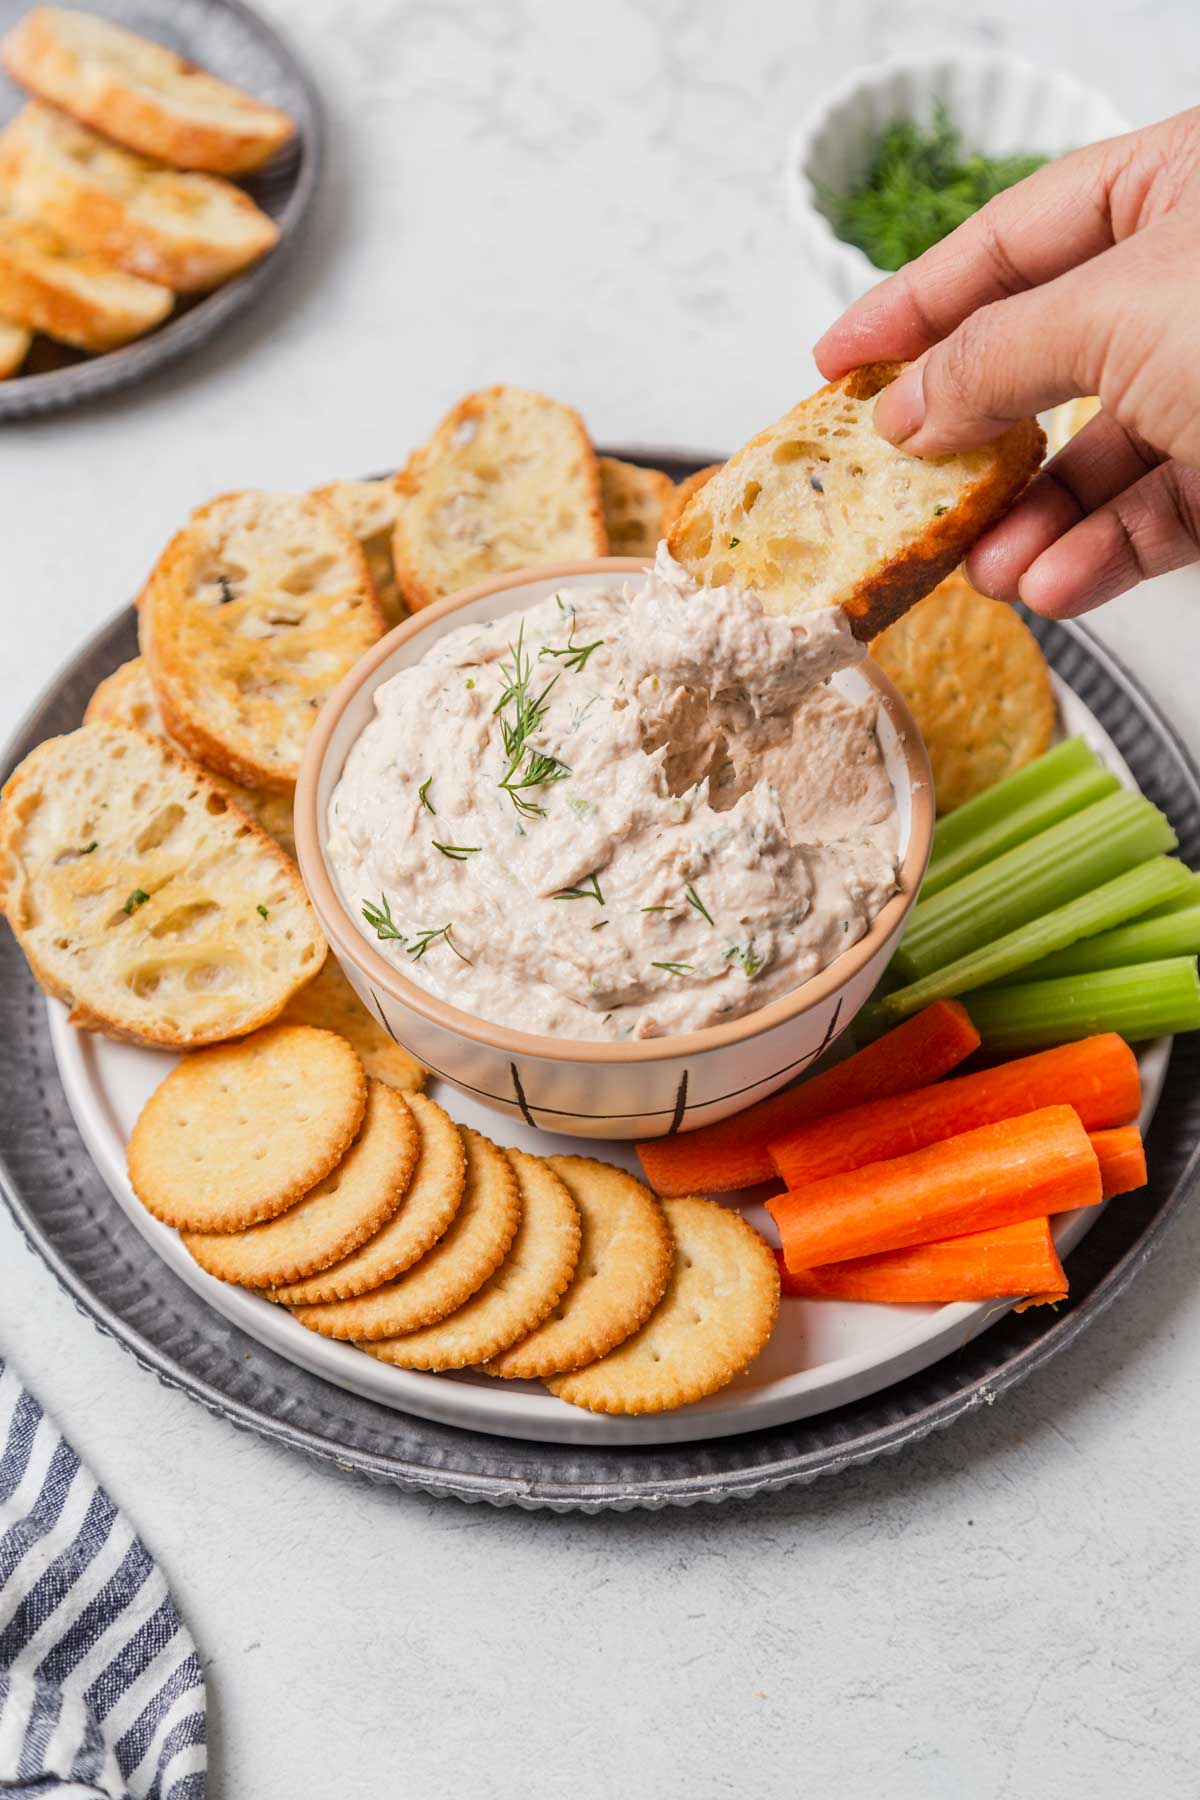 canned salmon dip with crostini, crackers and vegetables.